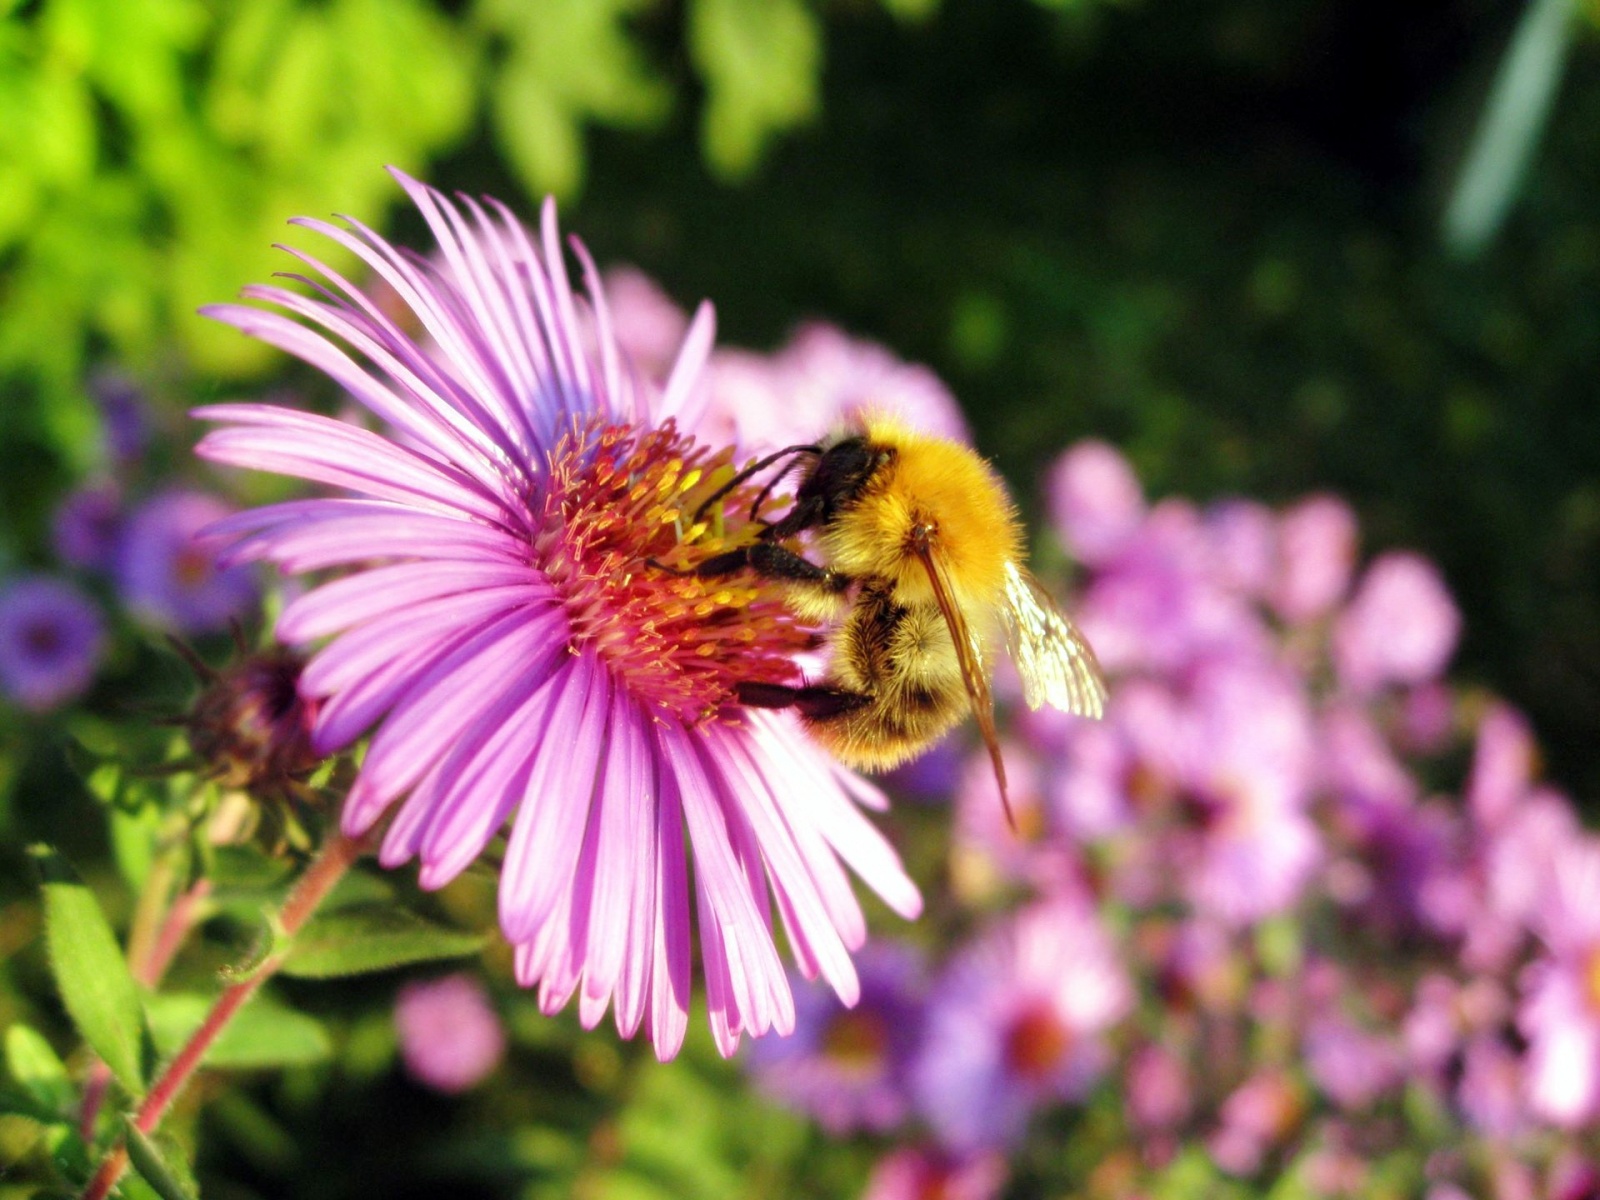 Honey Bee Wallpapers in jpg format for free download